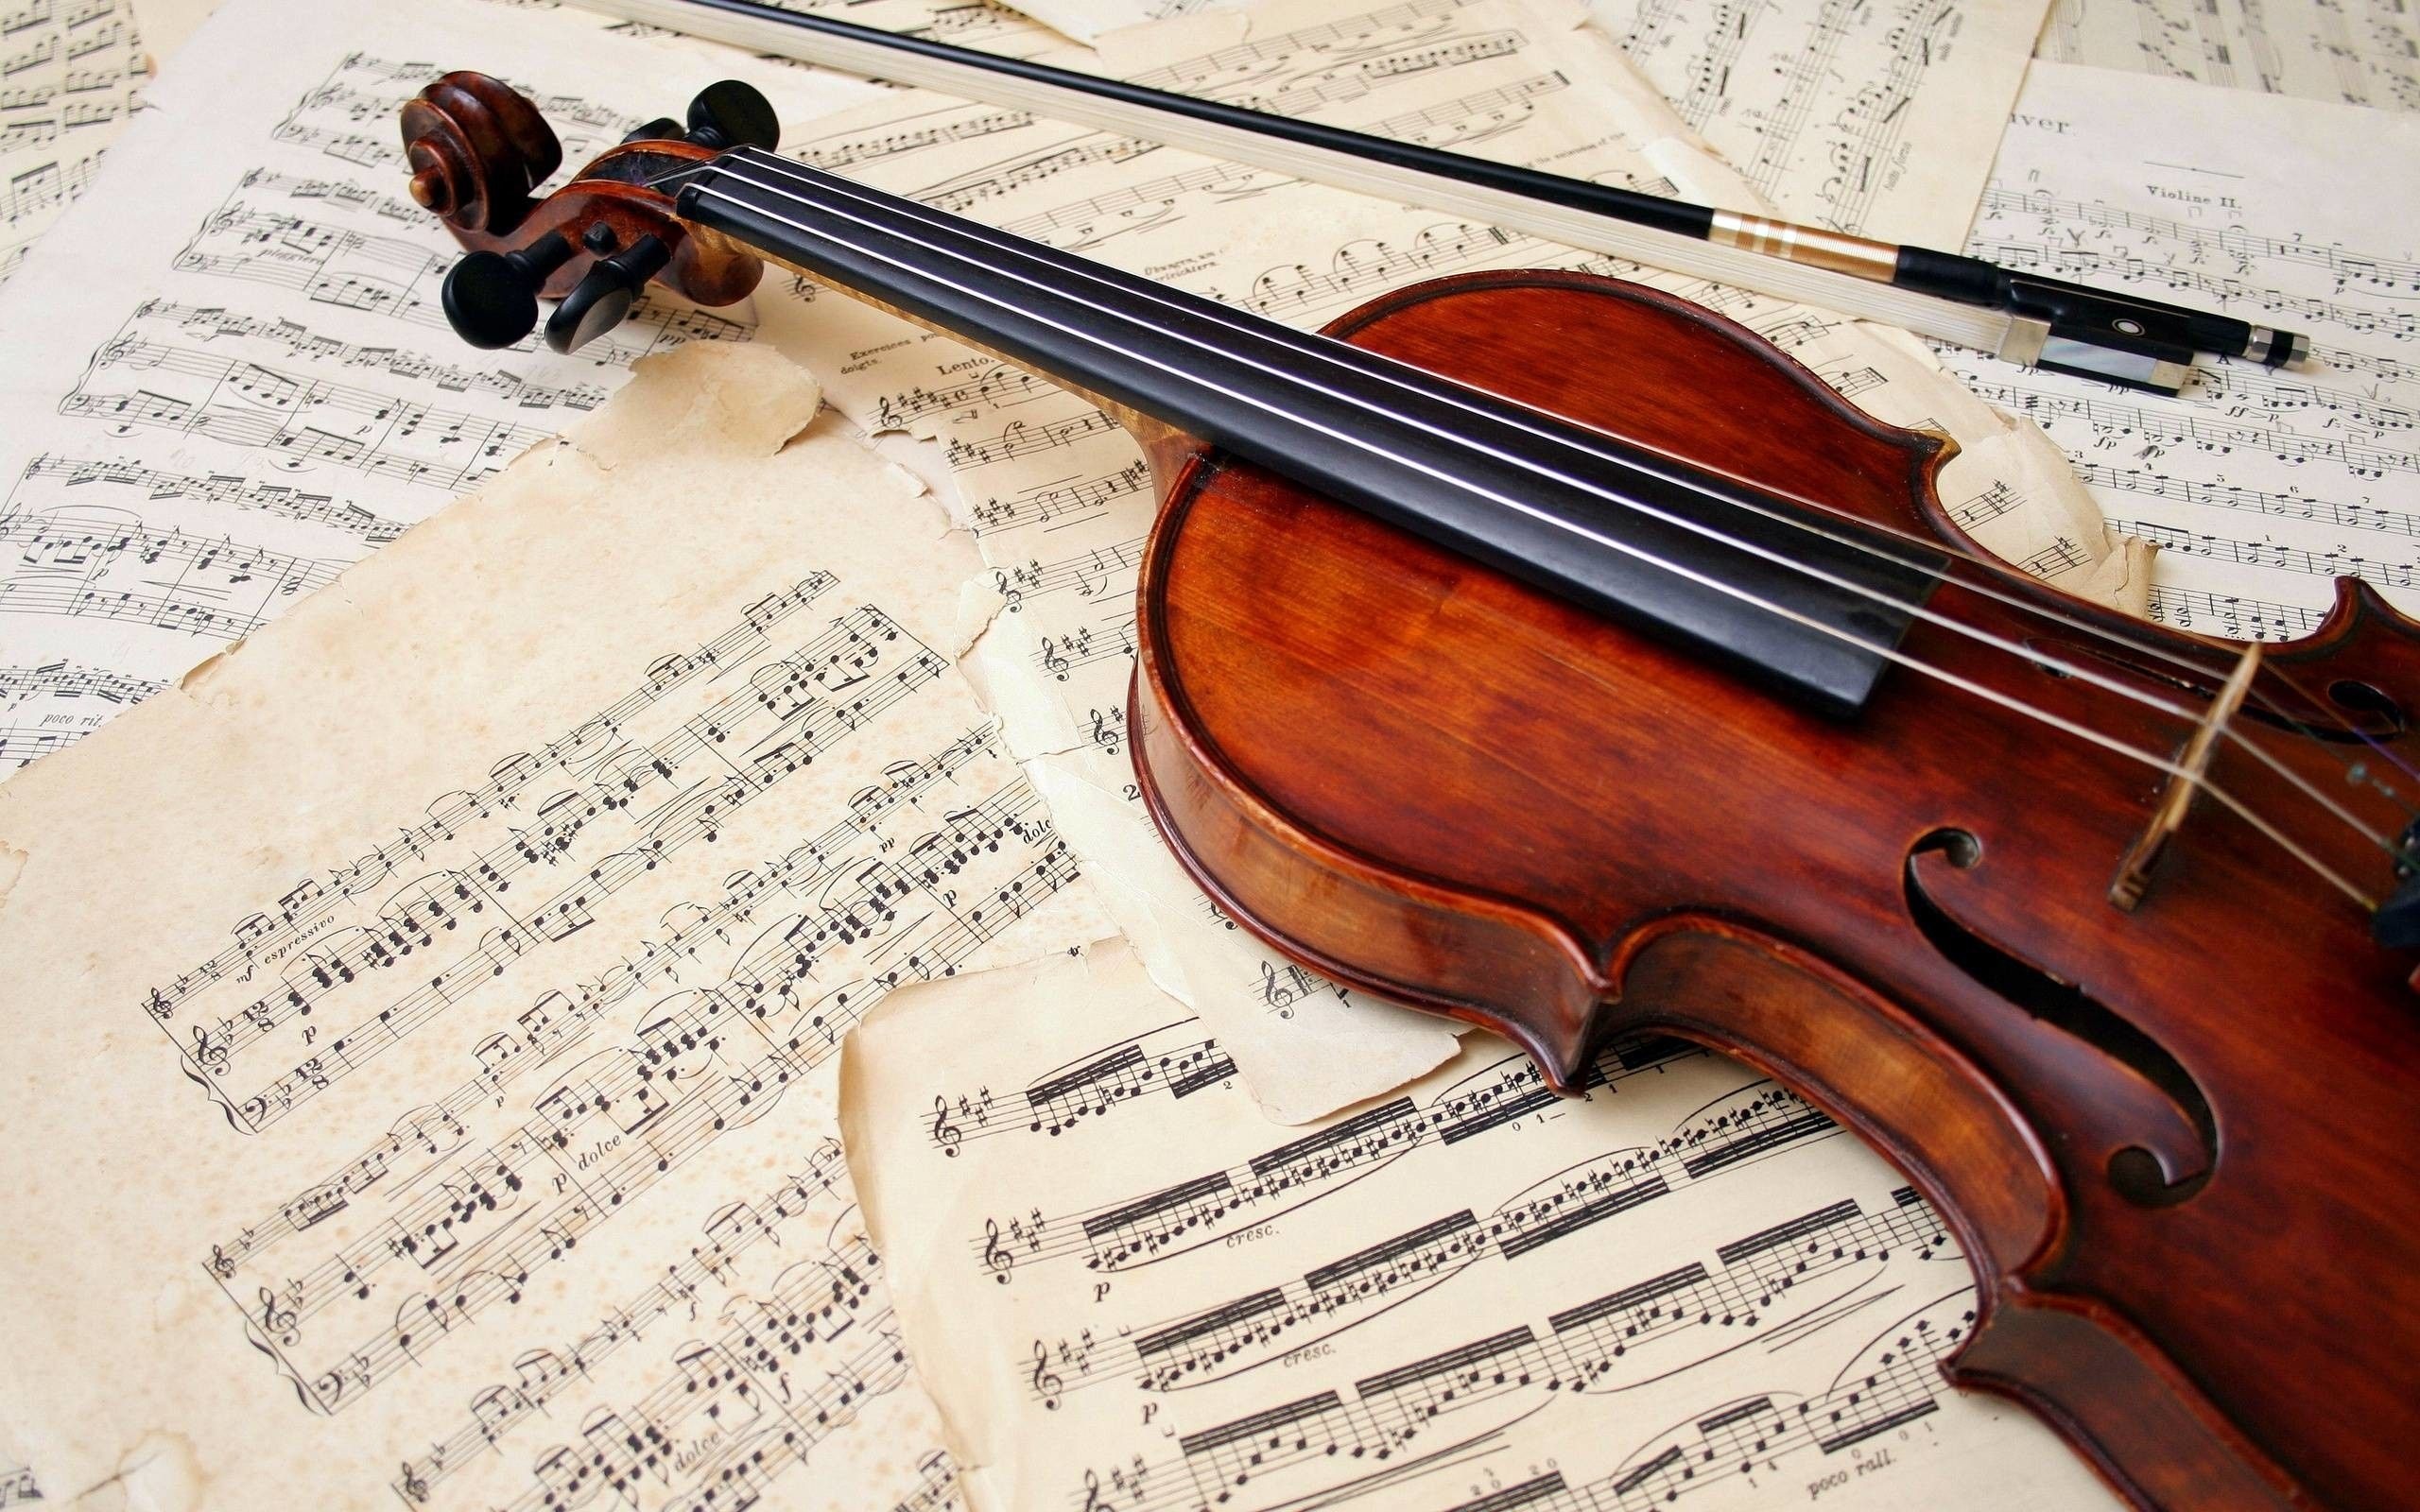 Violoncello: Marple Wood Fiddle, The Poetry Of Music Notes. 2560x1600 HD Wallpaper.